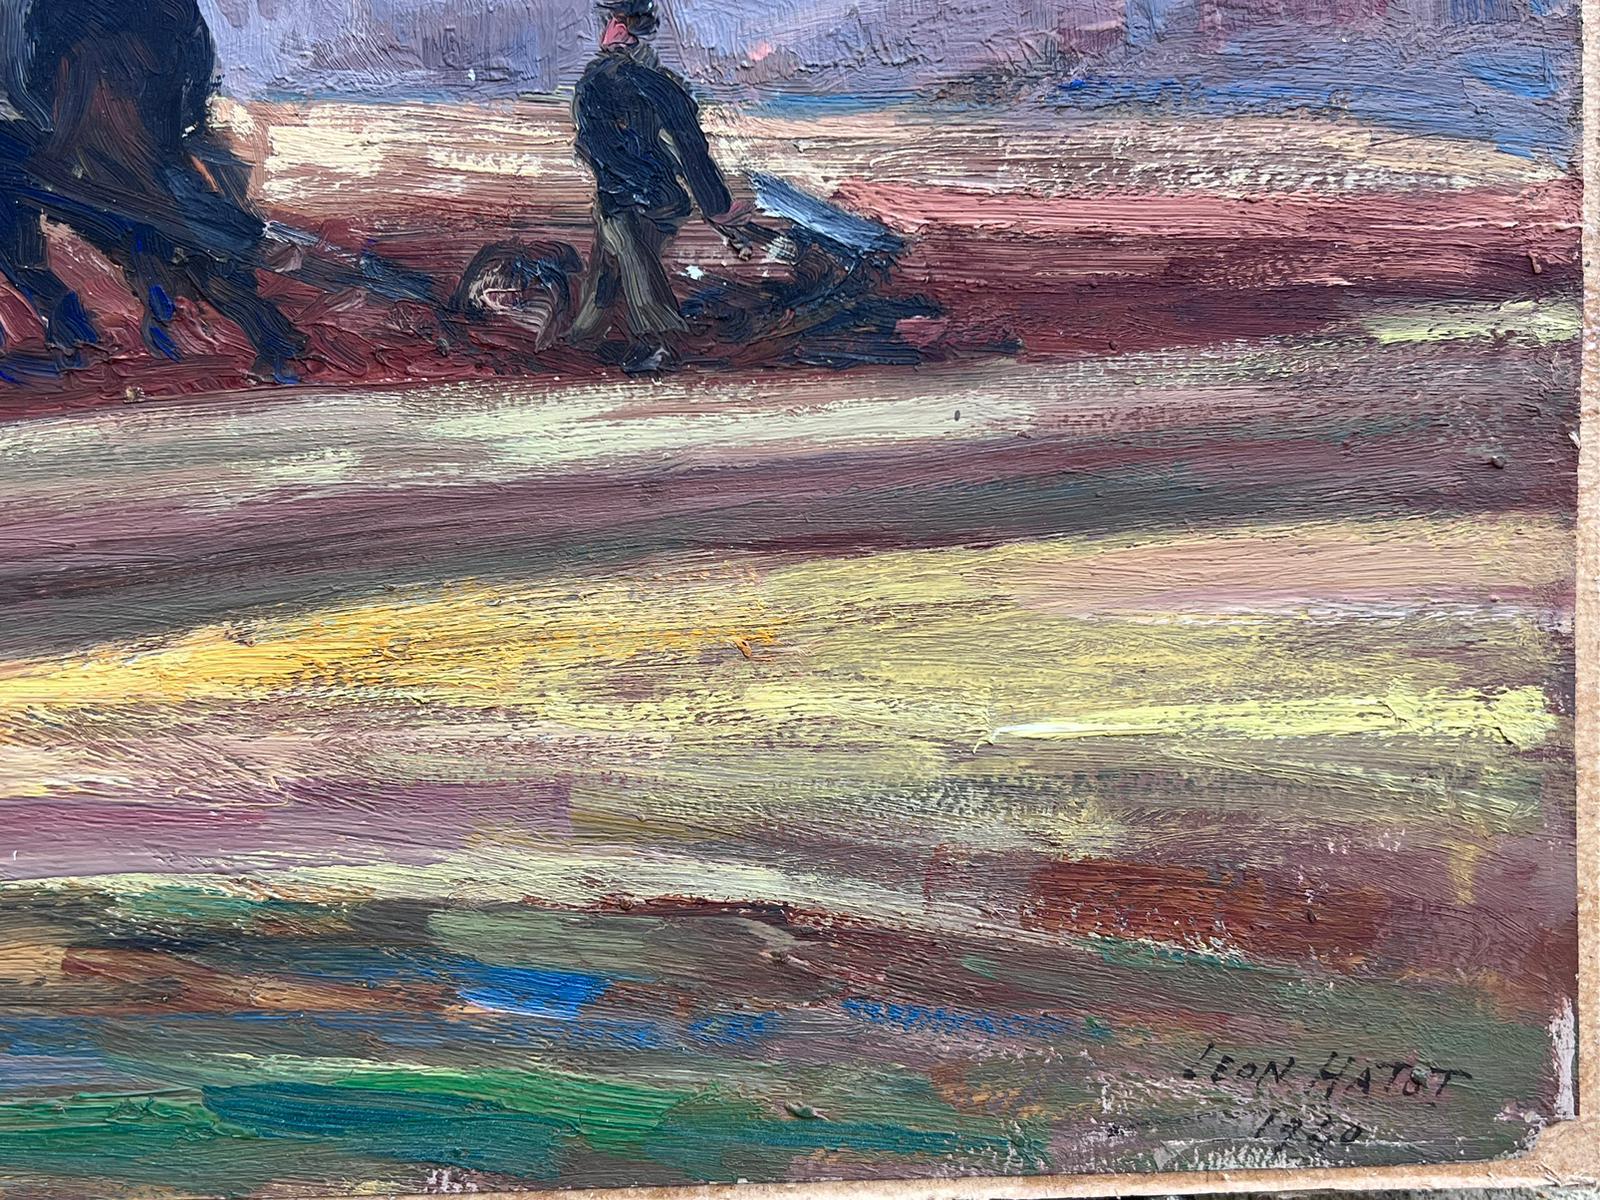 Artist/ School: Leon Hatot (French 1883-1953)

Title: Impressionist oil painting 

Medium: signed oil painting on thick paper, stuck on board unframed
dated 1940

Size:  painting: 12.5 x 19.5 inches.

Provenance: all the paintings we have for sale